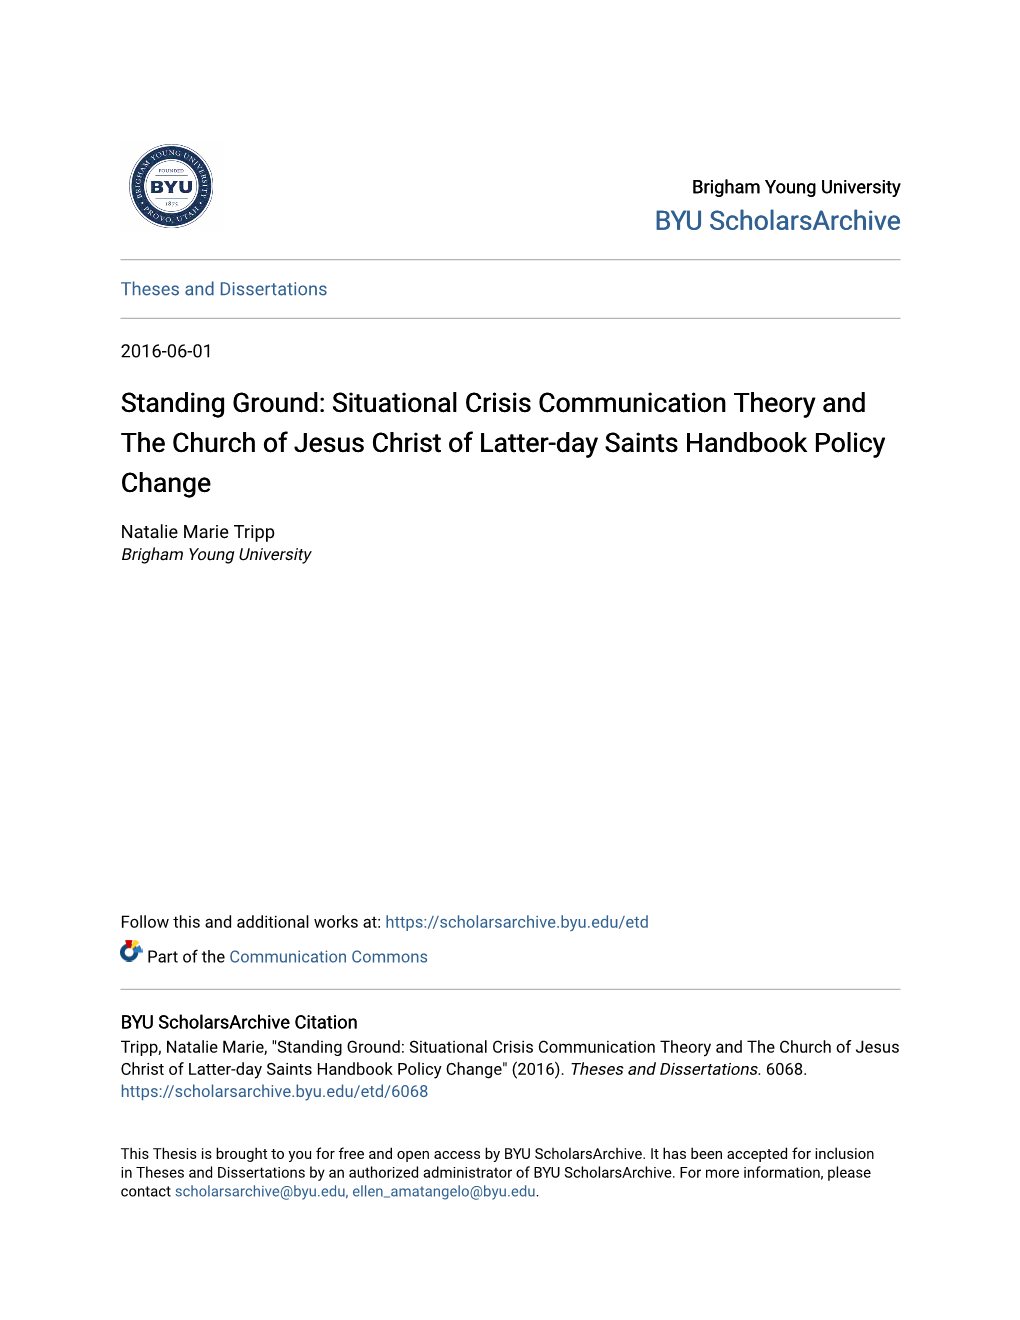 Situational Crisis Communication Theory and the Church of Jesus Christ of Latter-Day Saints Handbook Policy Change